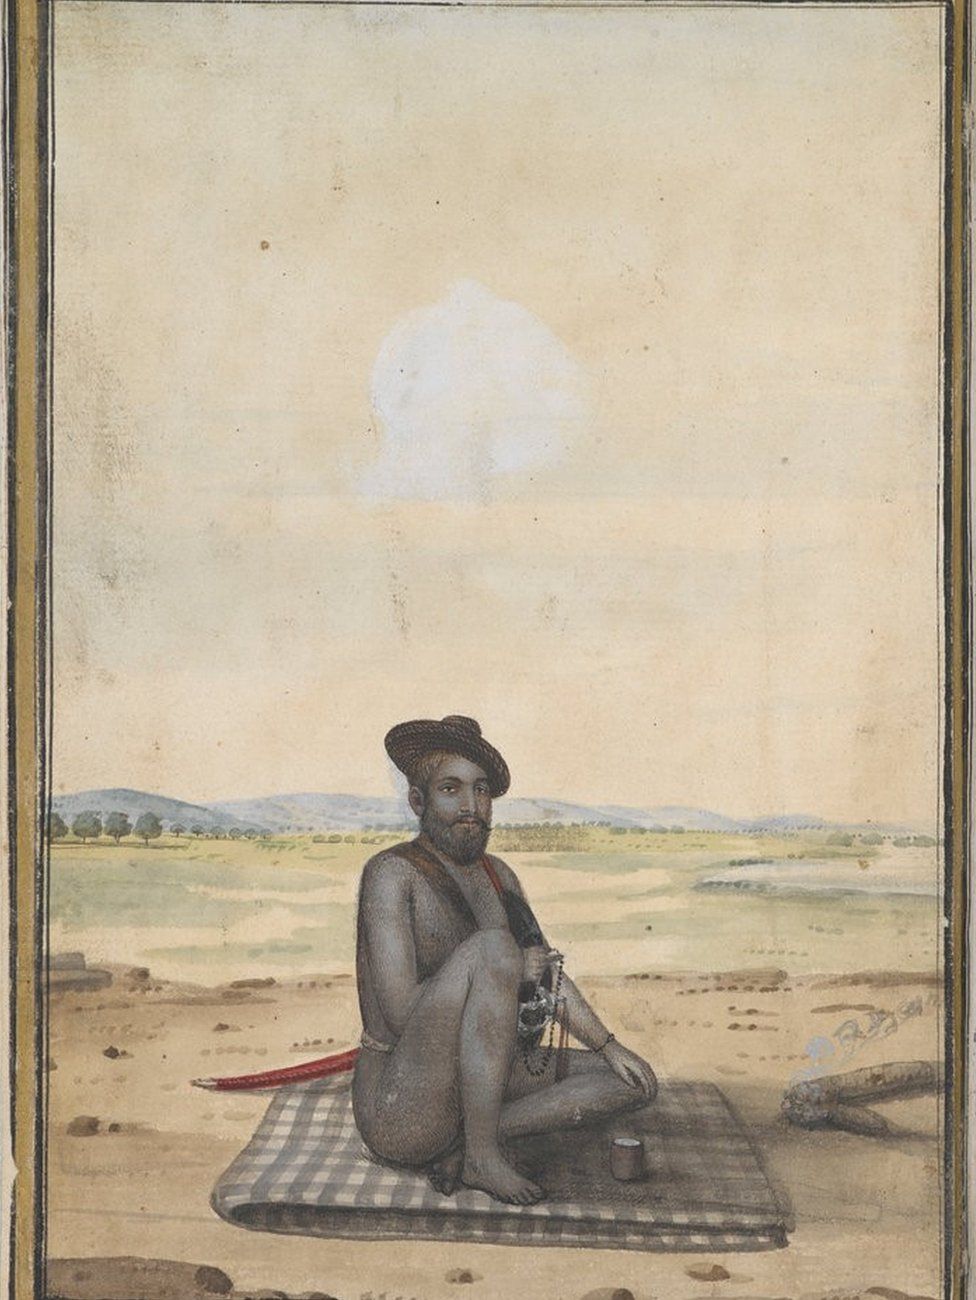 A member of the Naga sect. Members of this sect used to cover their bodies with mud. They carried weapons and even a simple argument among them would end up with a war in which many died. A painting from a nineteenth century manuscript of Fuqua'-i Hind, a text describing the different Hindu religious sects